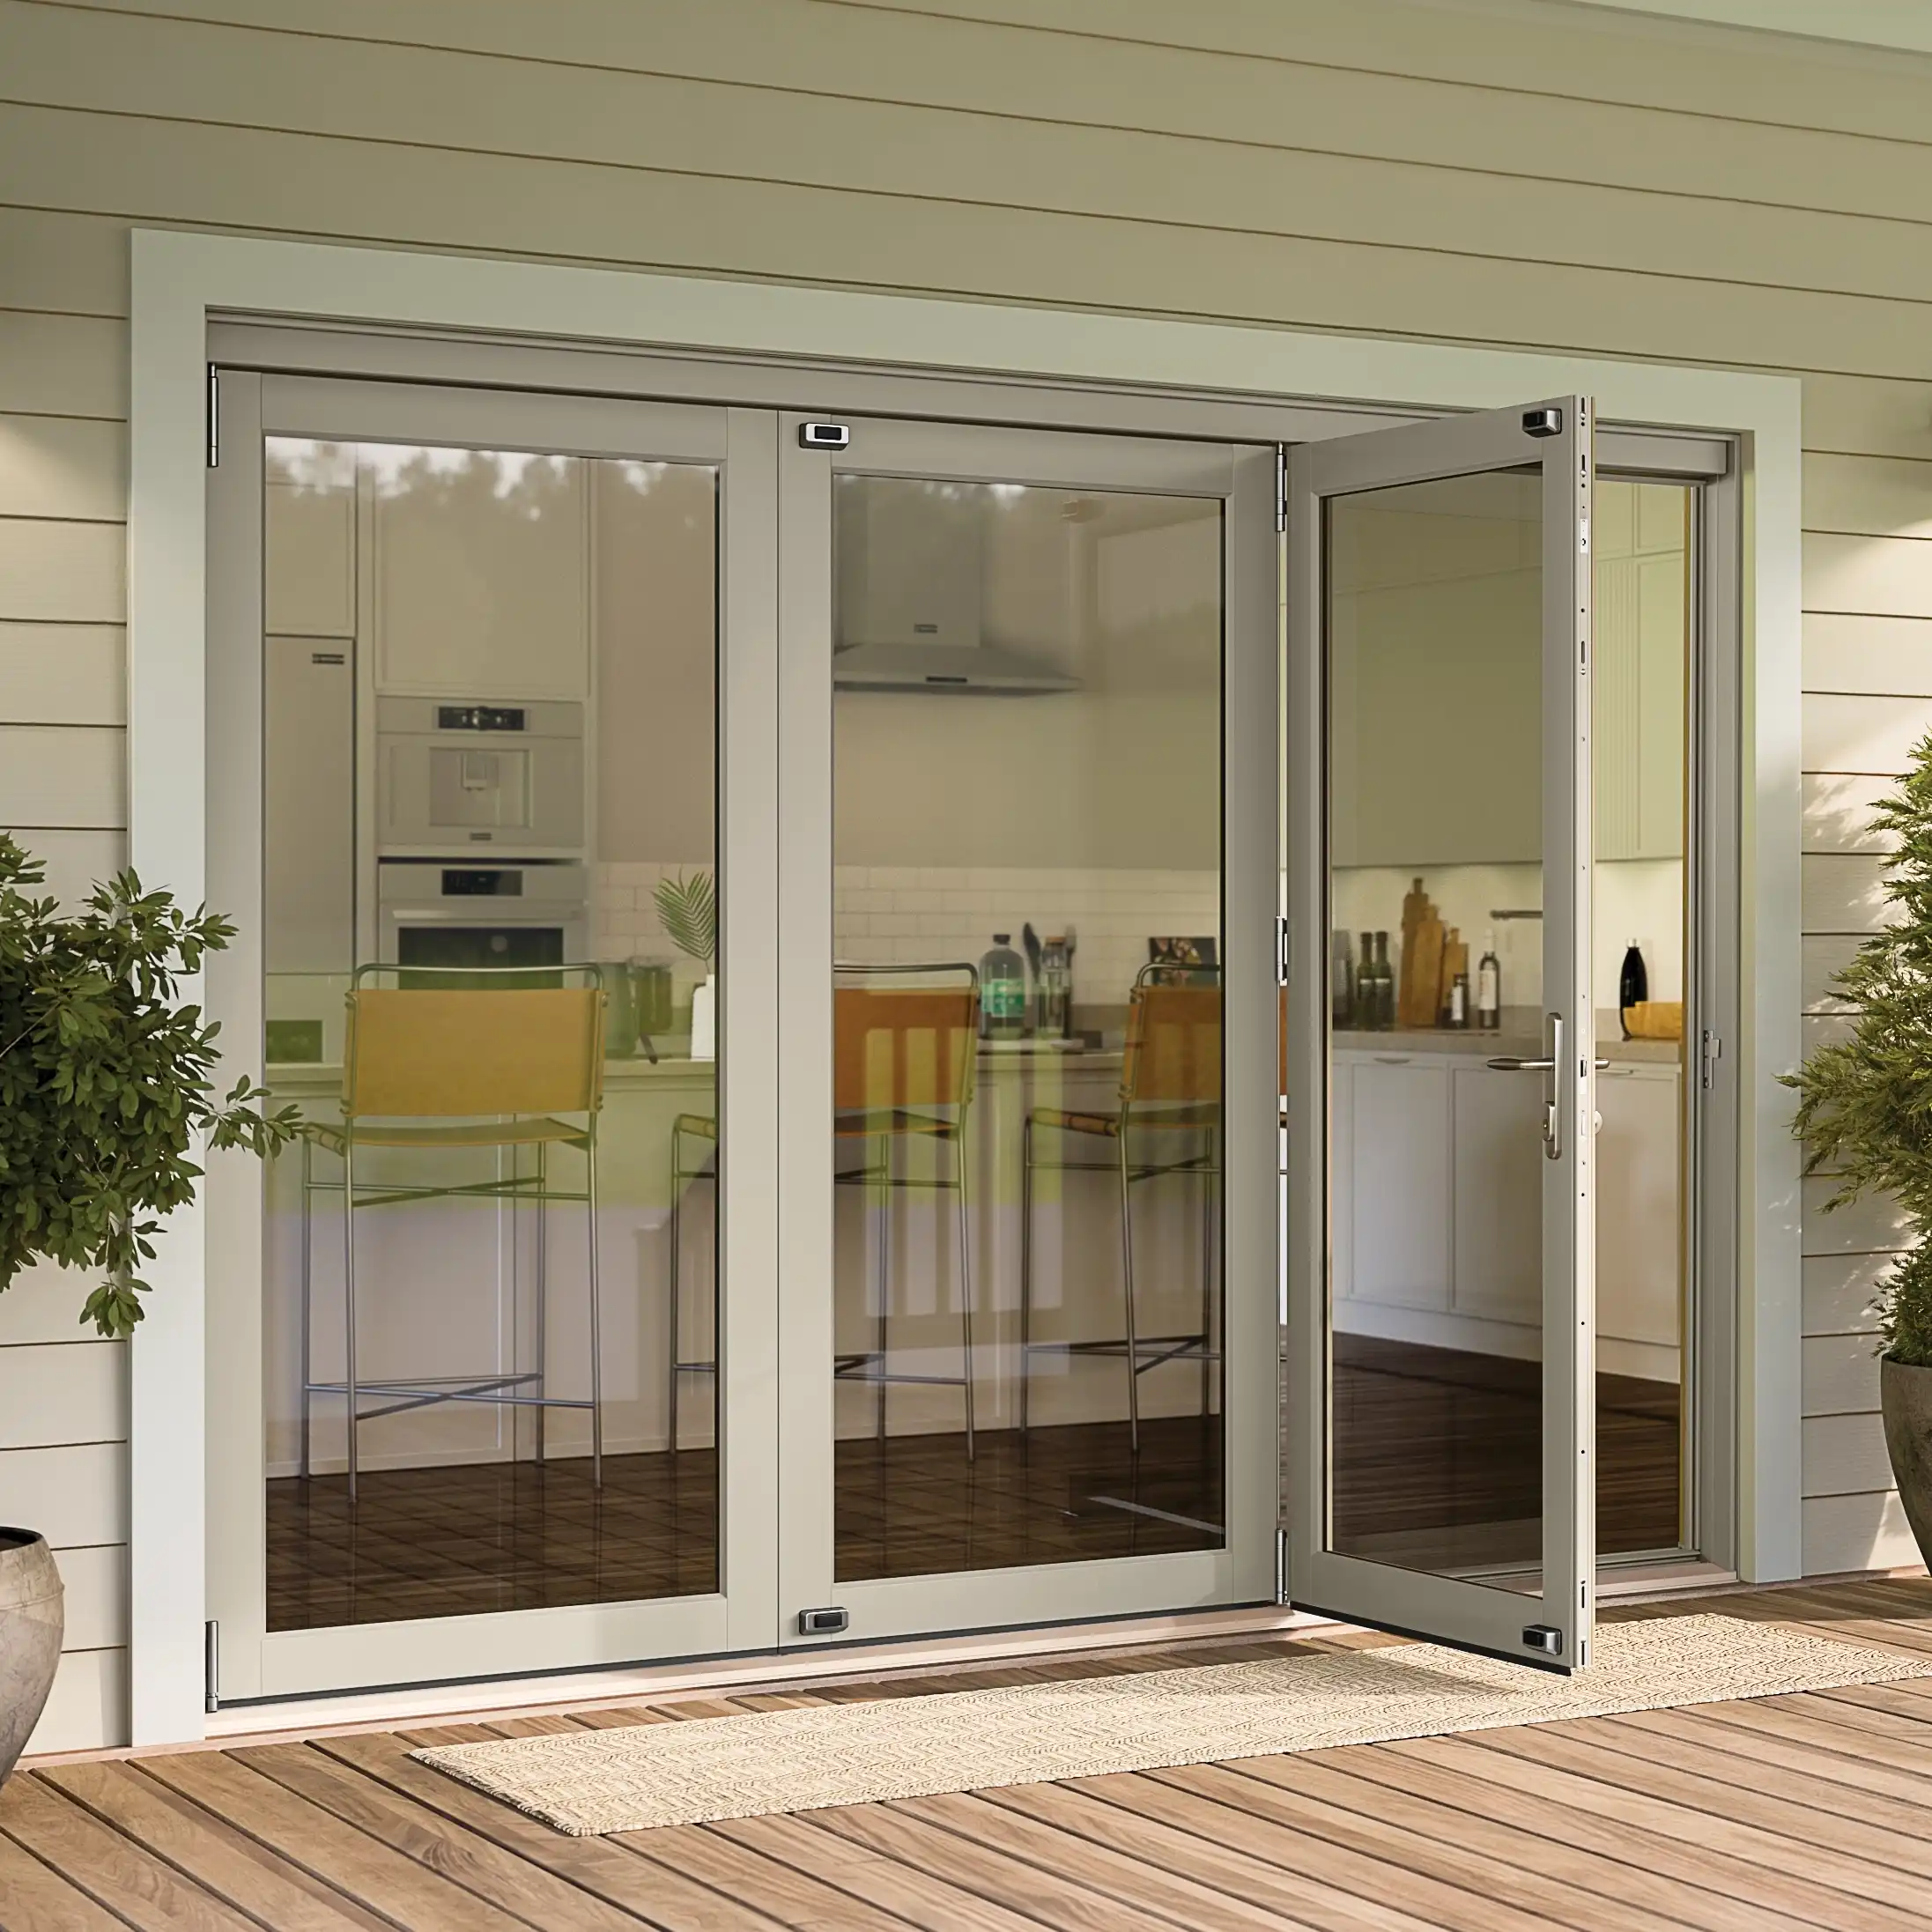 Exterior view of a partially opened Marvin Replacement Bi-fold patio door.